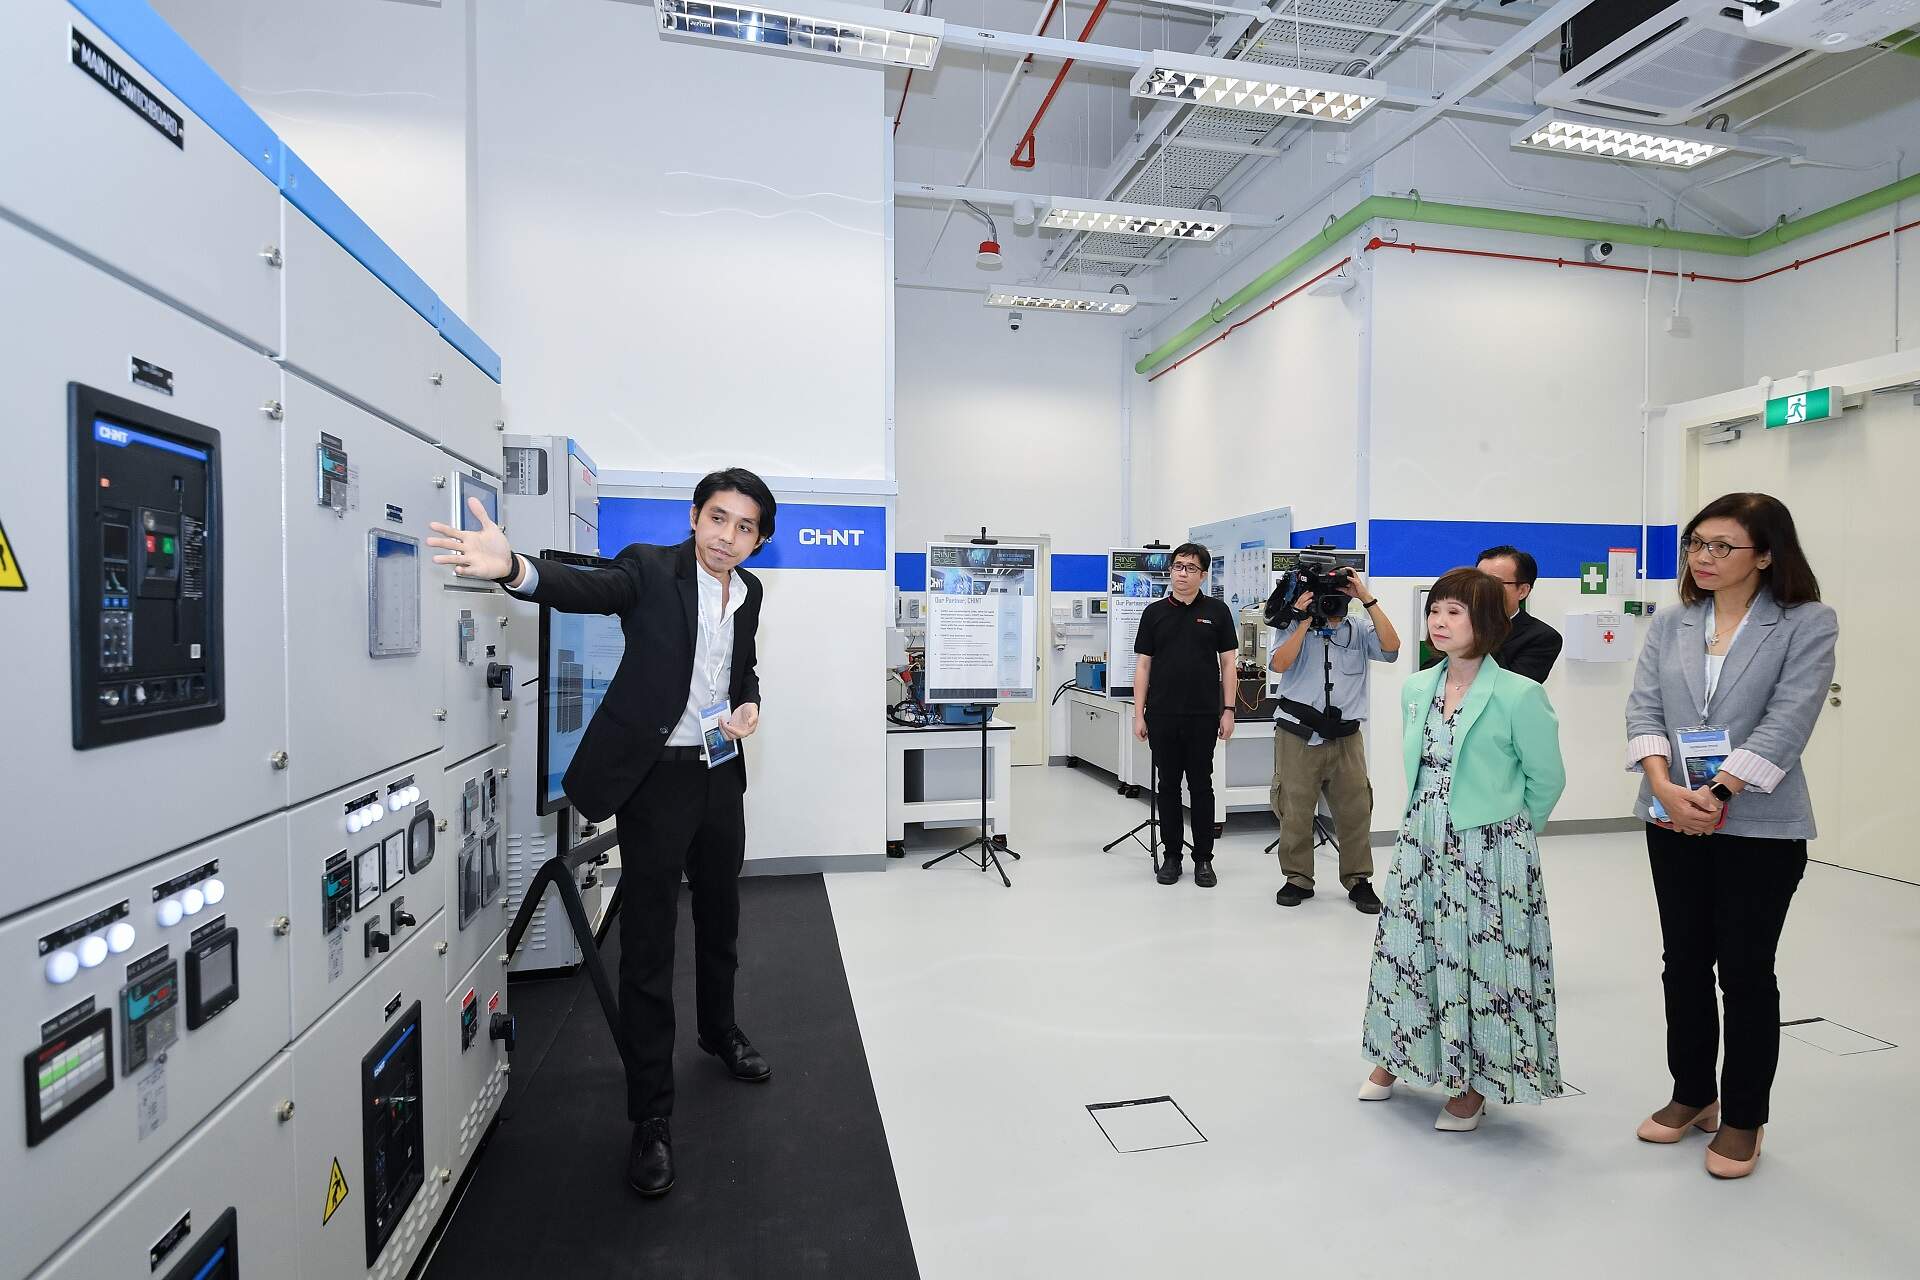 CHINT Global Regional Applications Marketing Manager, Paul Lee, introducing the Sunlight Electrical Series Forti Compact Switchgear to Dr. Amy Khor, Senior Minister of State for Sustainaability and the Enrivonment during the opening of SP-CHINT Smart Electrical Power Training Laboratory  during the Regional Industrial Network Conference (RINC) 